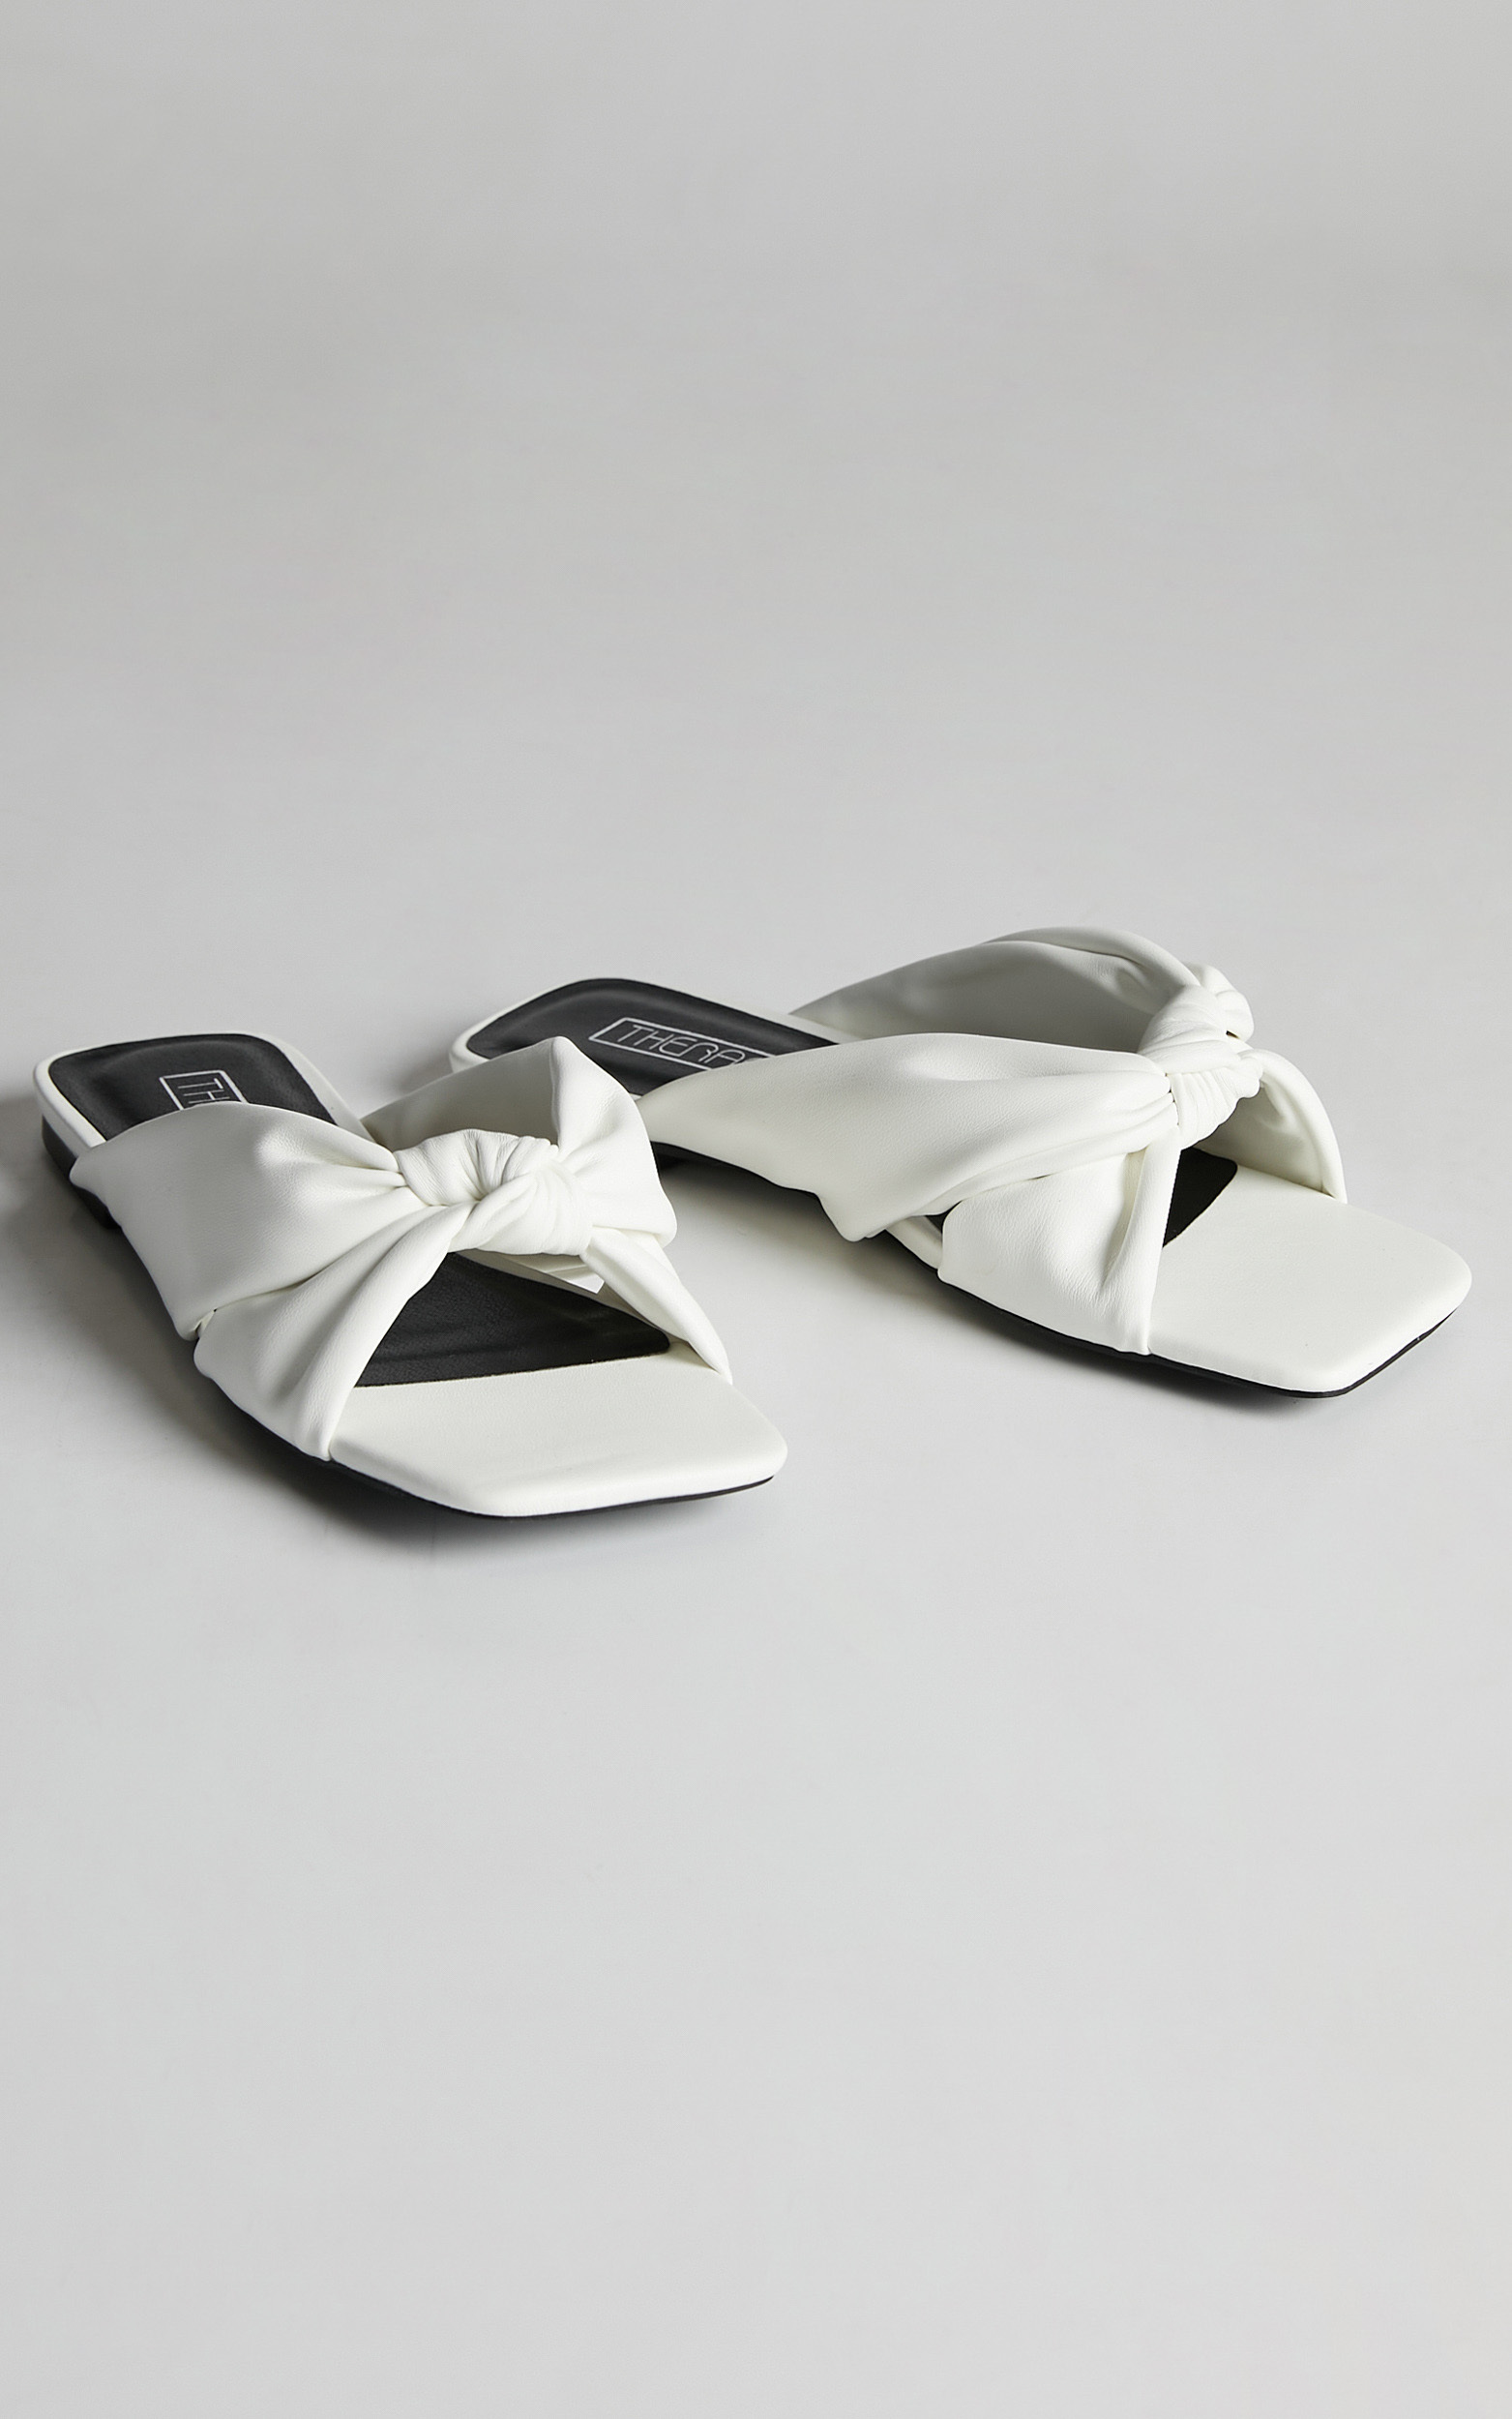 THERAPY - SOFIA SANDALS in White - 05, WHT2, hi-res image number null